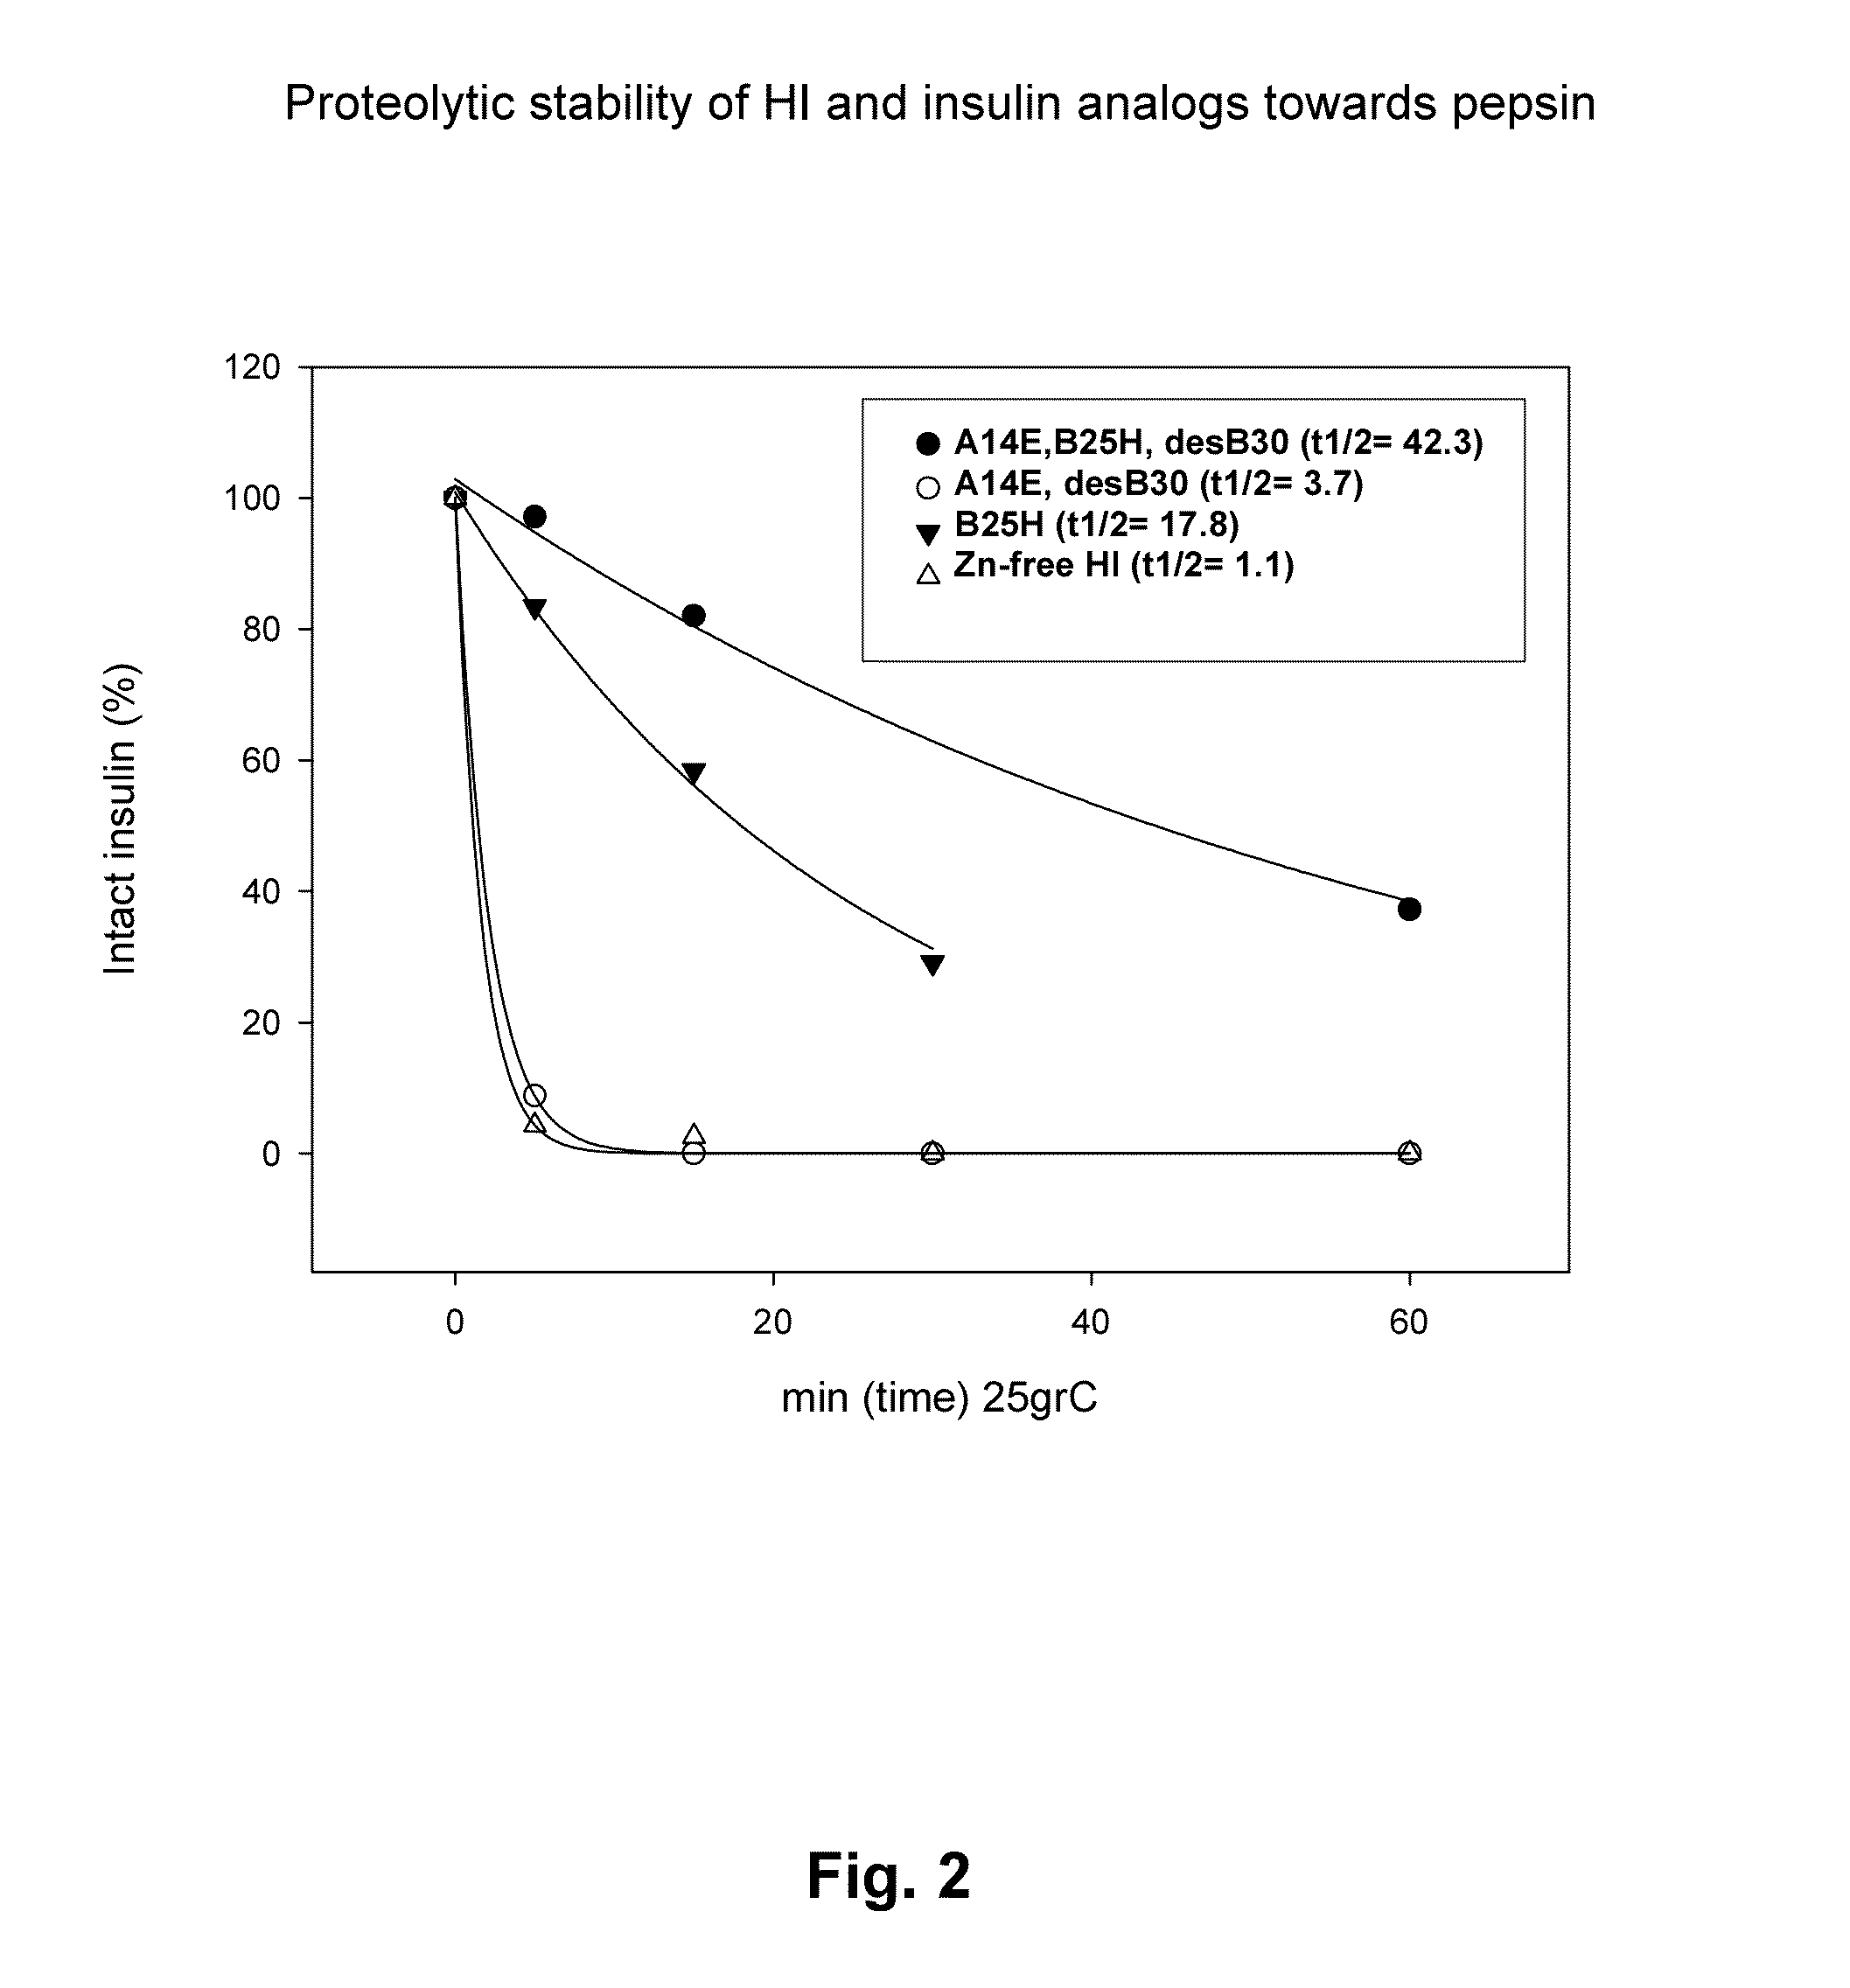 Protease resistant insulin analogues